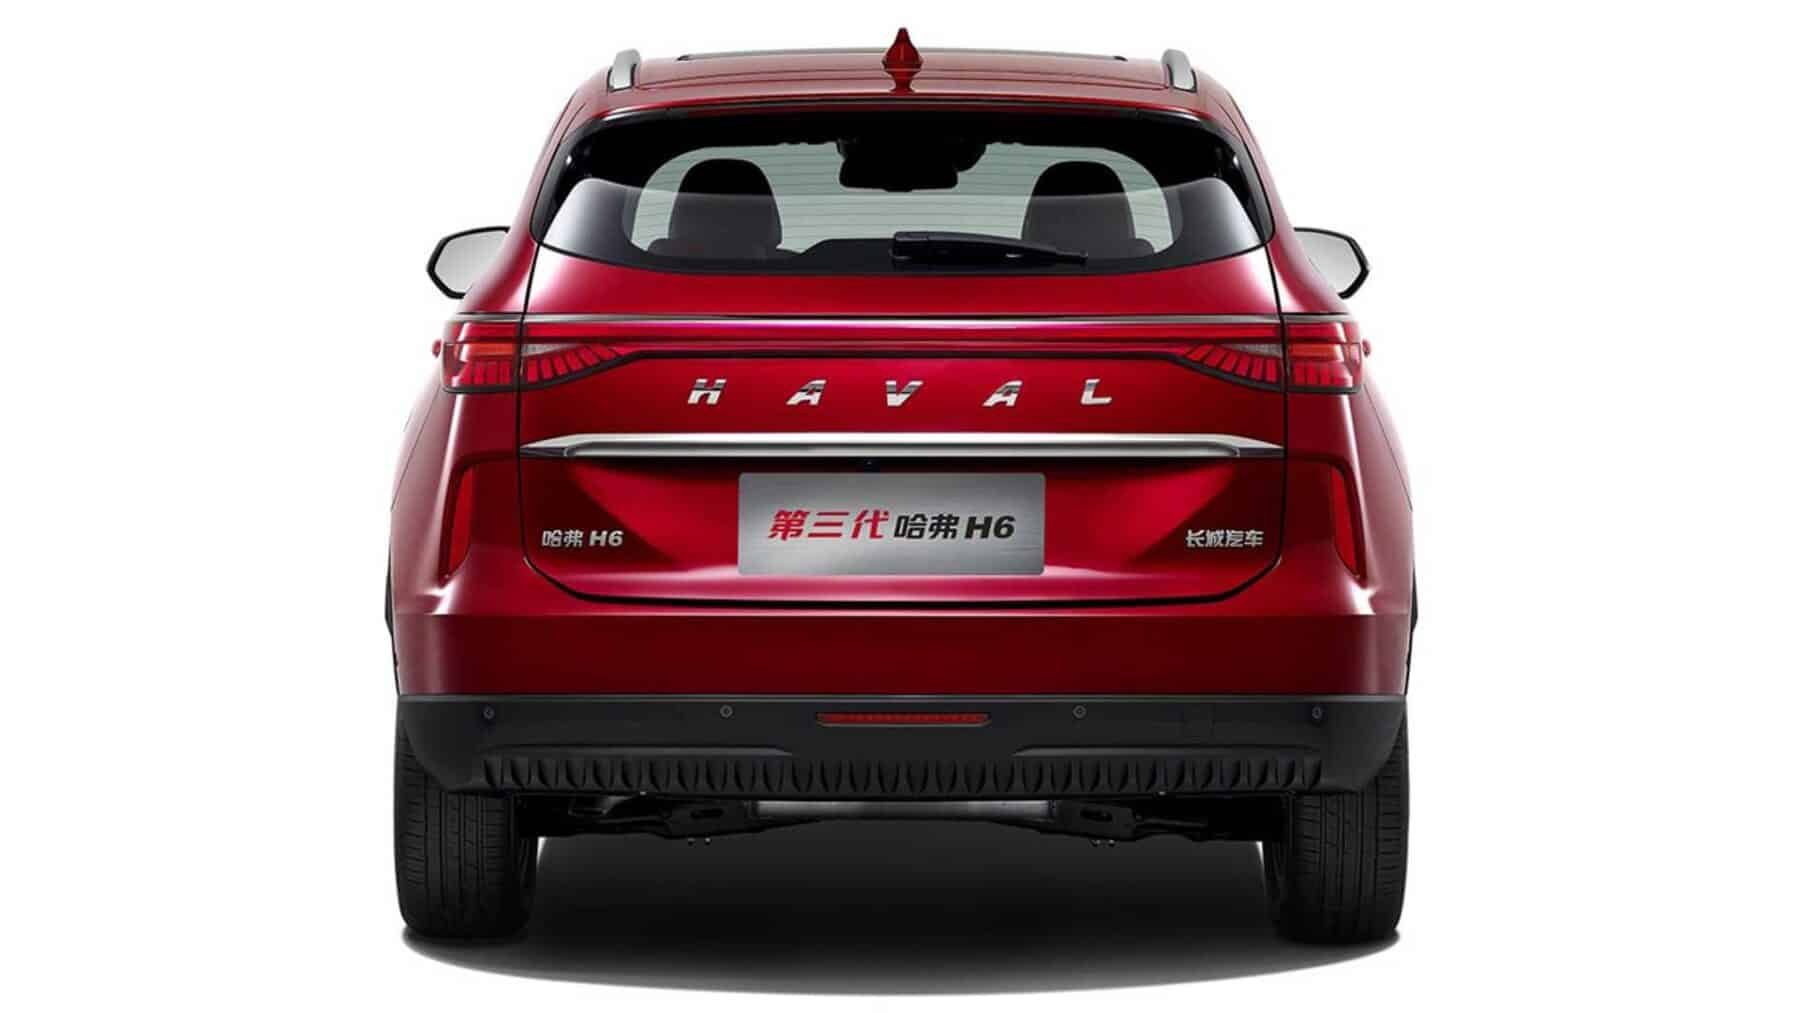 First images of the new Haval H6